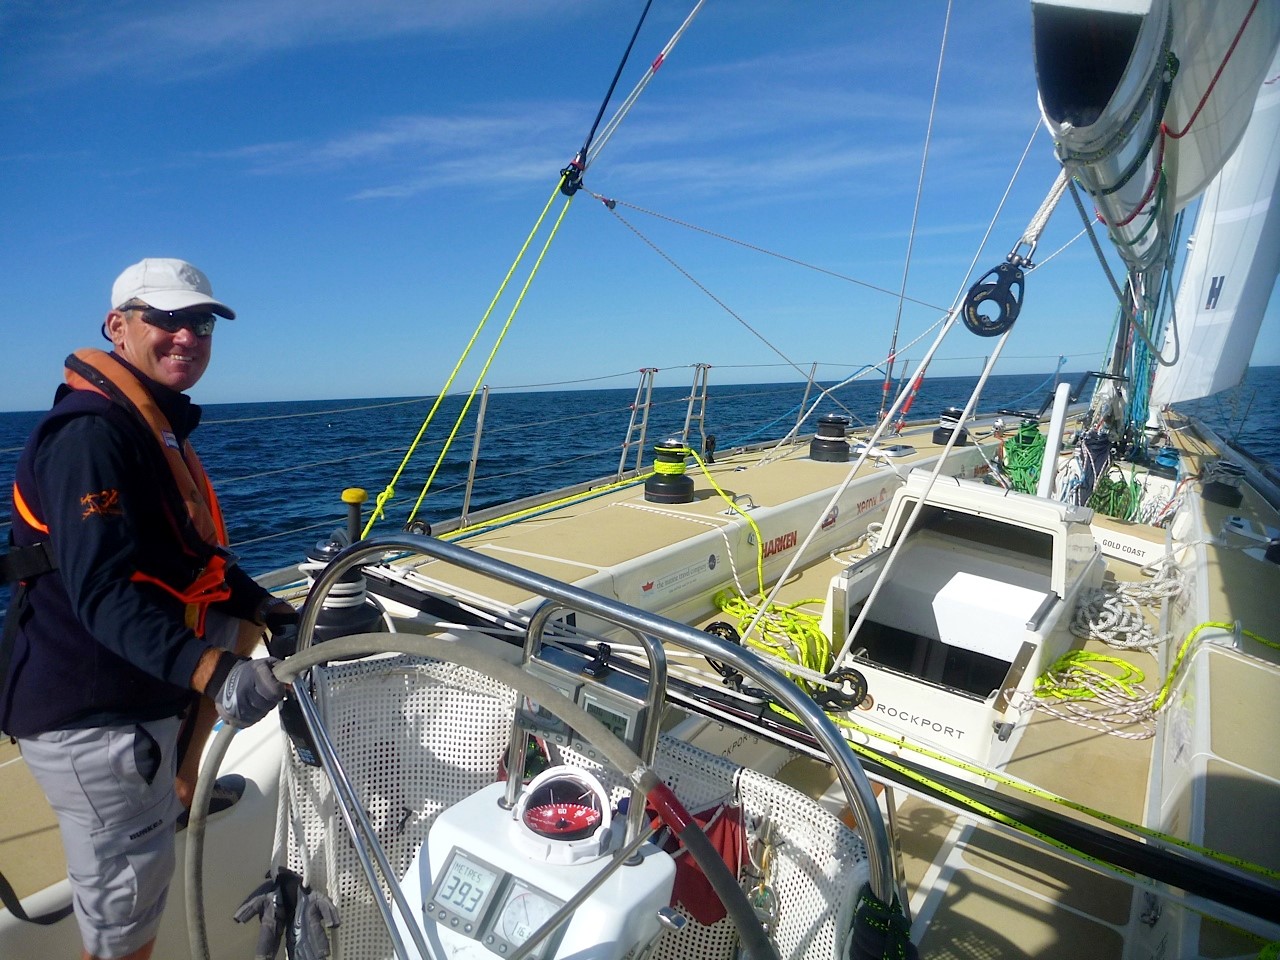 John Charles at the helm during Clipper Race training in Australia